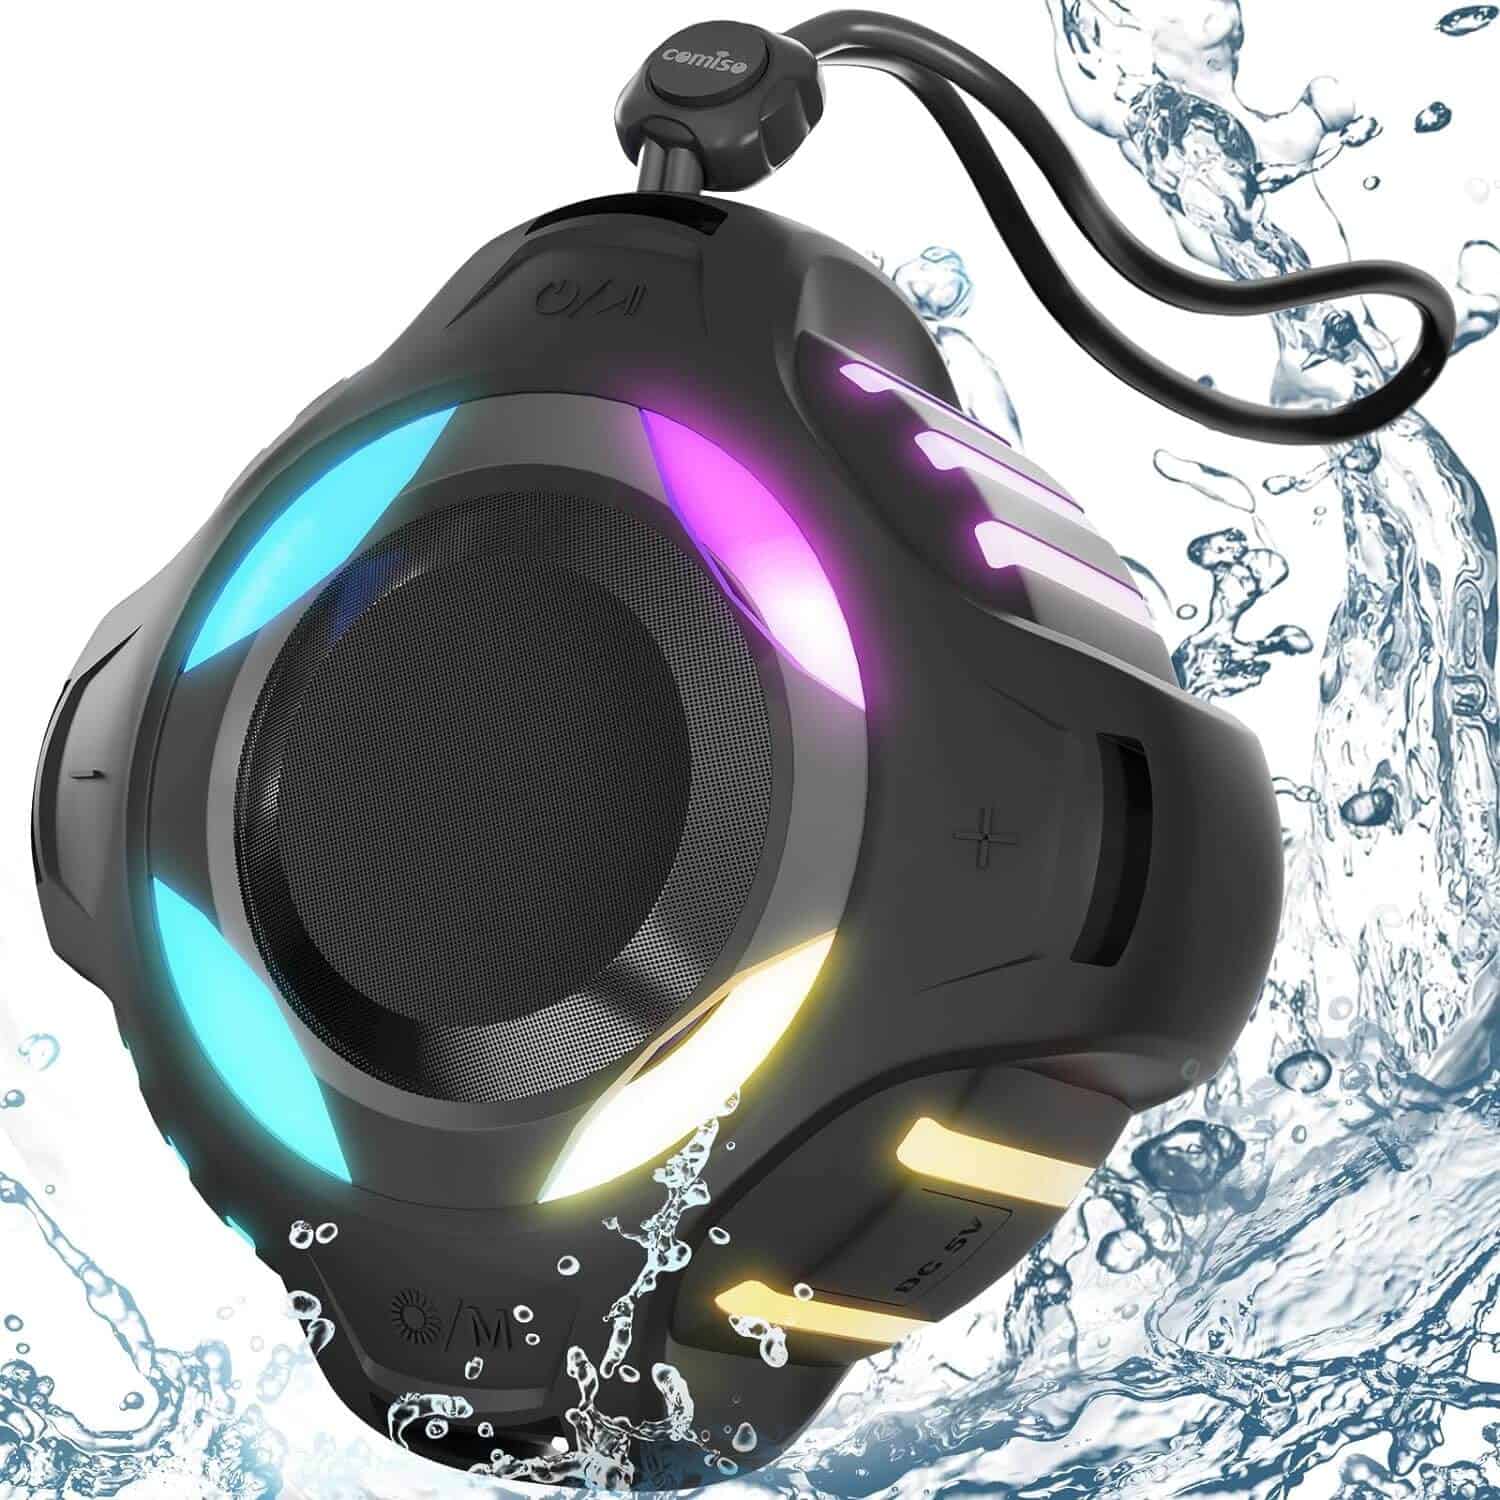 Waterproof Bluetooth speaker with superior sound quality and vibrant LED lights for added ambiance.